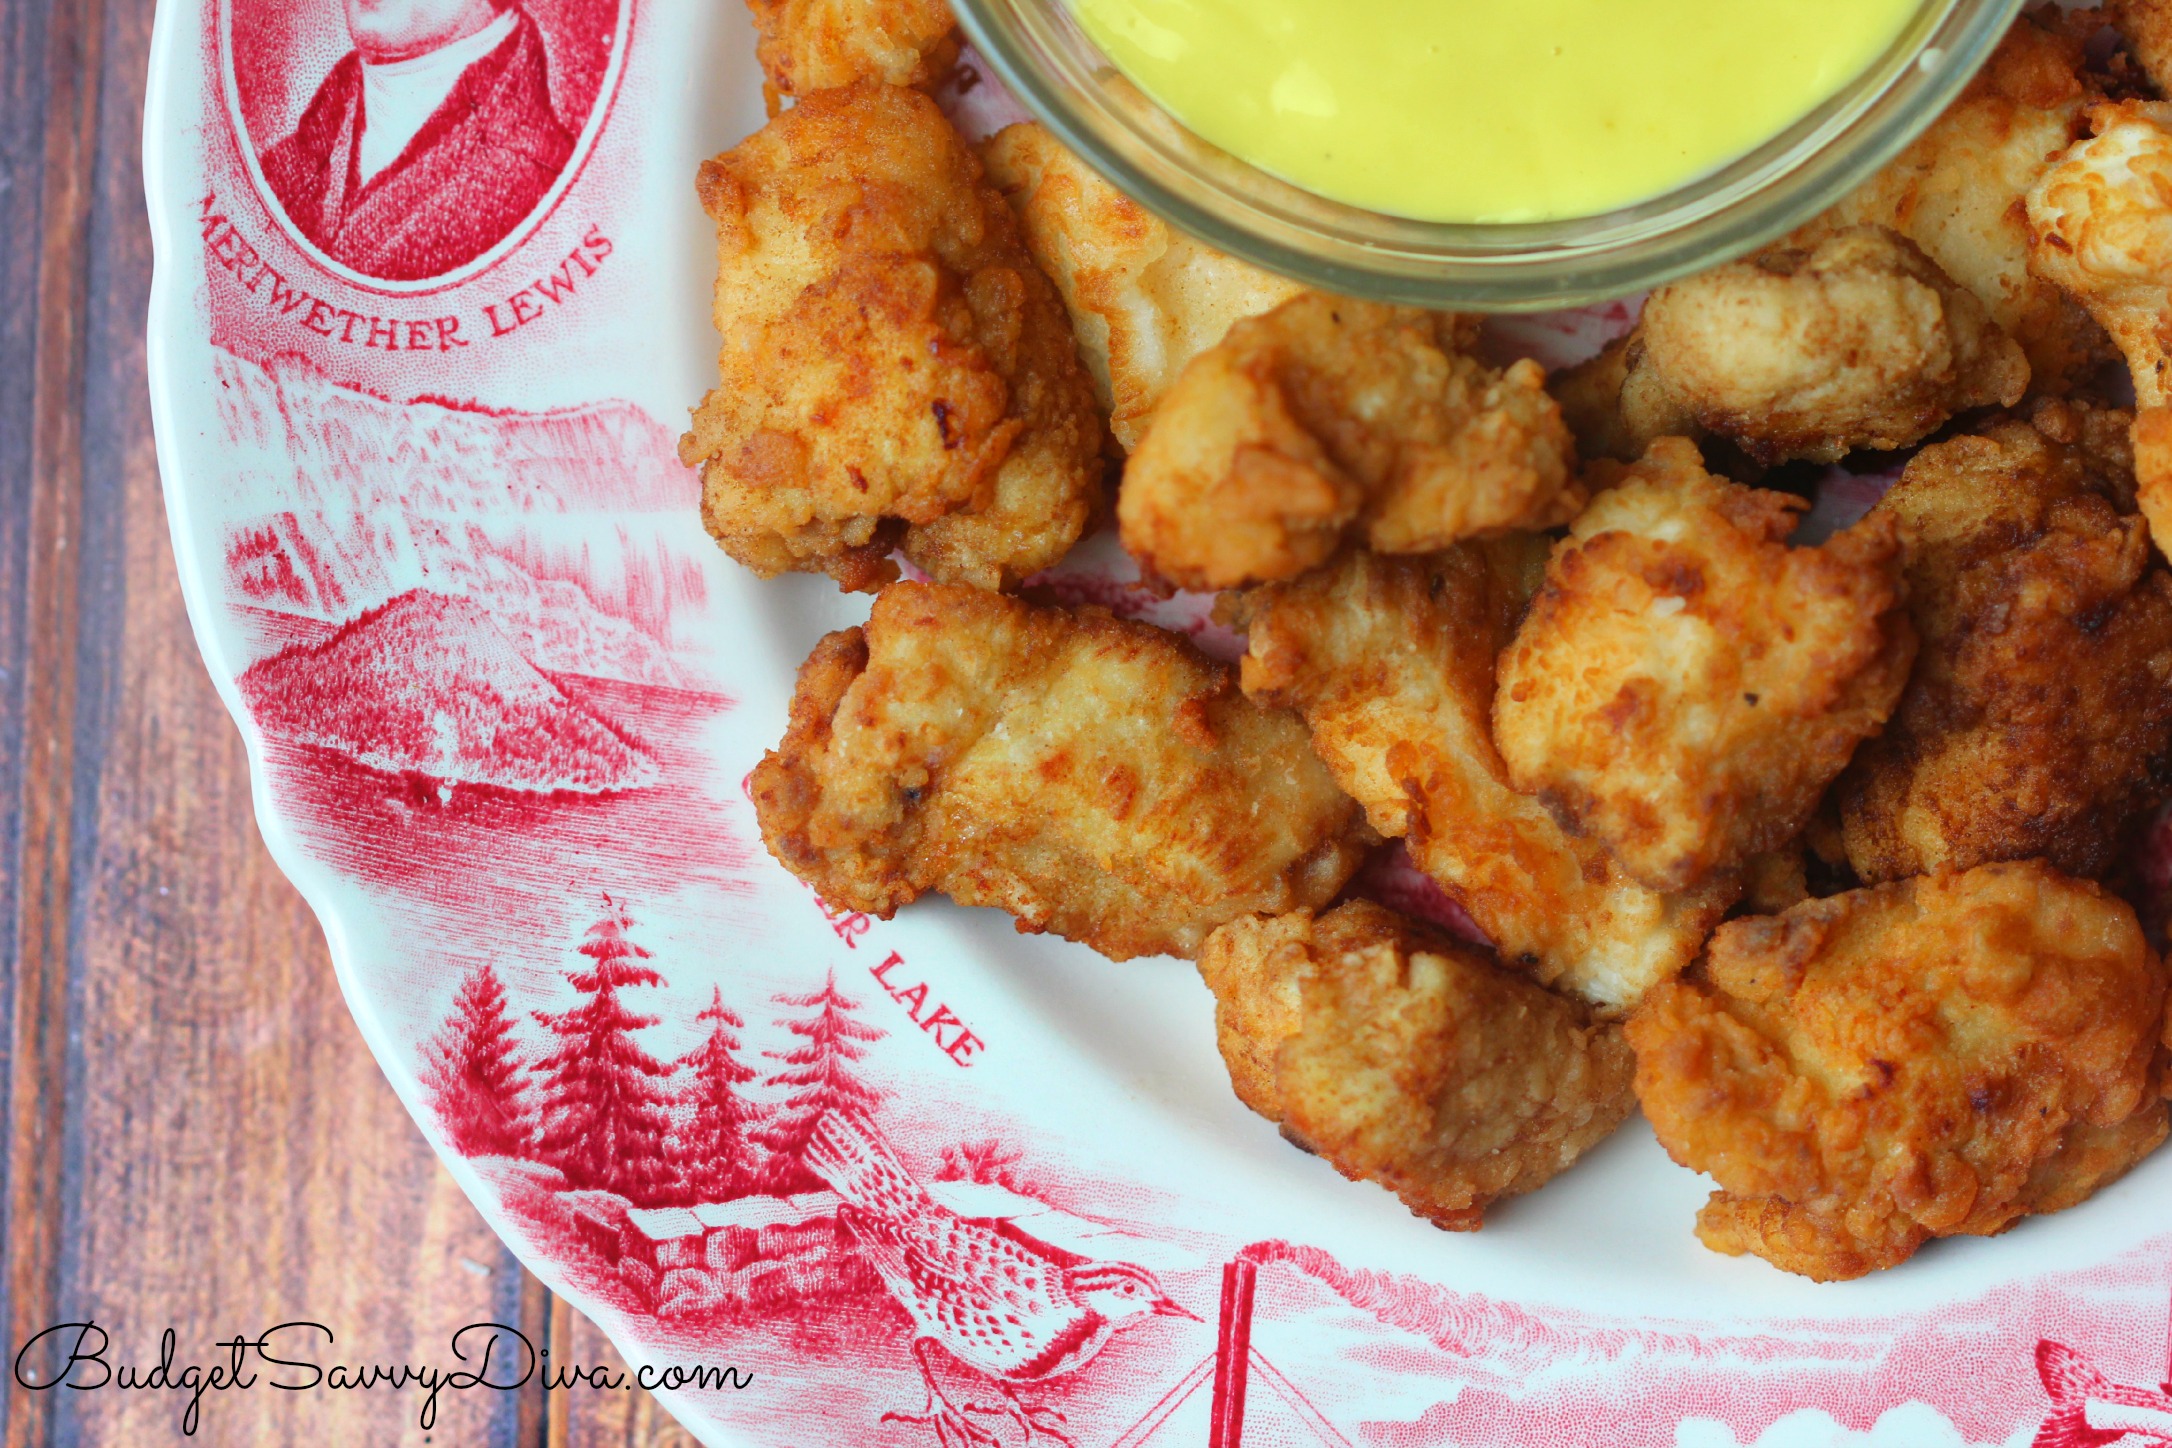 CHICK-FIL-A GRILLED CHICKEN NUGGETS RECIPE